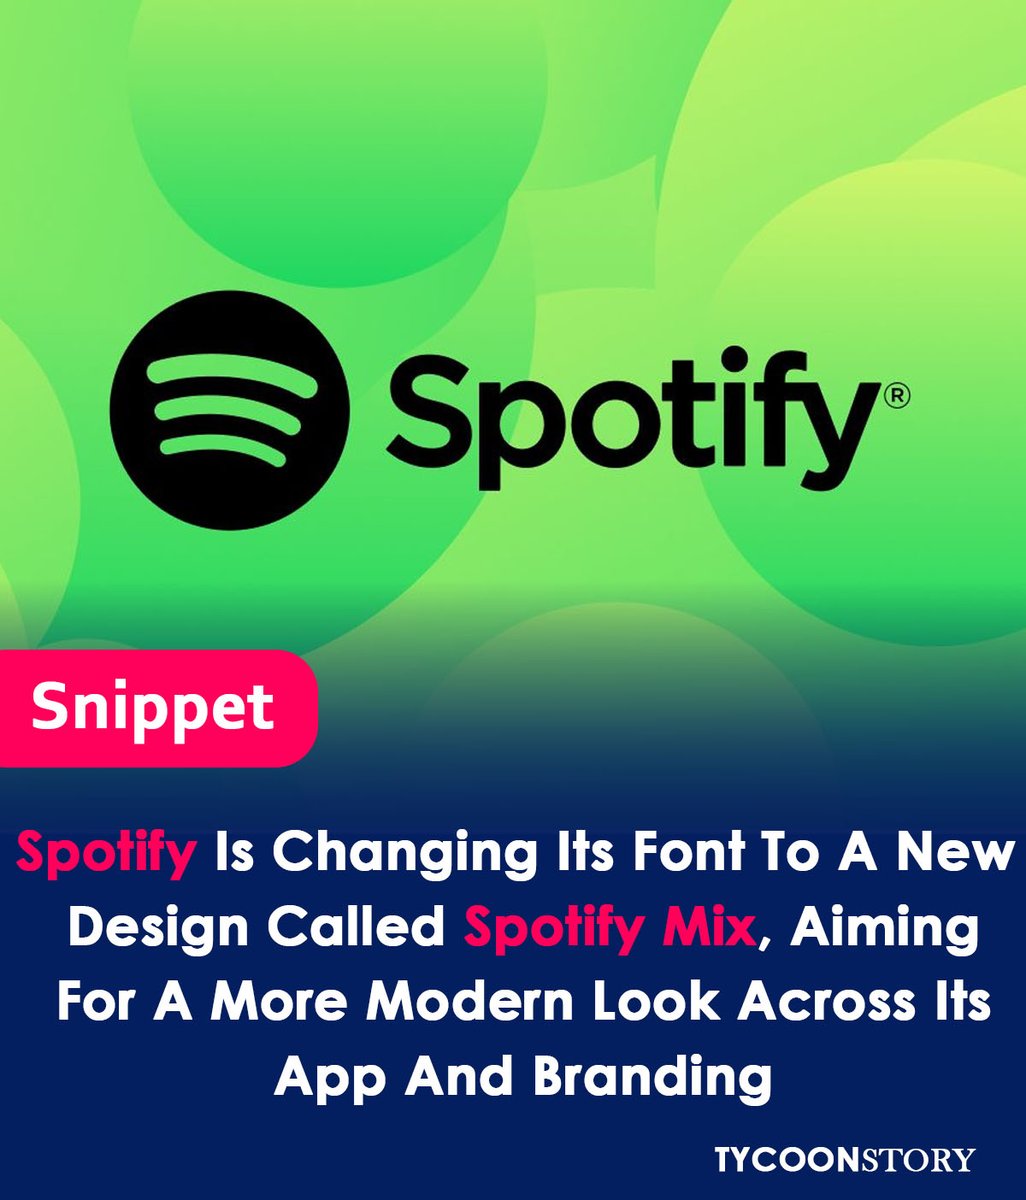 Spotify Gets a Makeover: Introducing Spotify Mix, the New Font for Your Eyes #FontDesign #BrandingUpdate #VisualIdentity #Typography #DesignRefresh #SpotifyMix #SpotifyRedesign #GoodbyeCircular #SpotifyLookandFeel #MoreThanMusic #VariableFont @Spotify tycoonstory.com